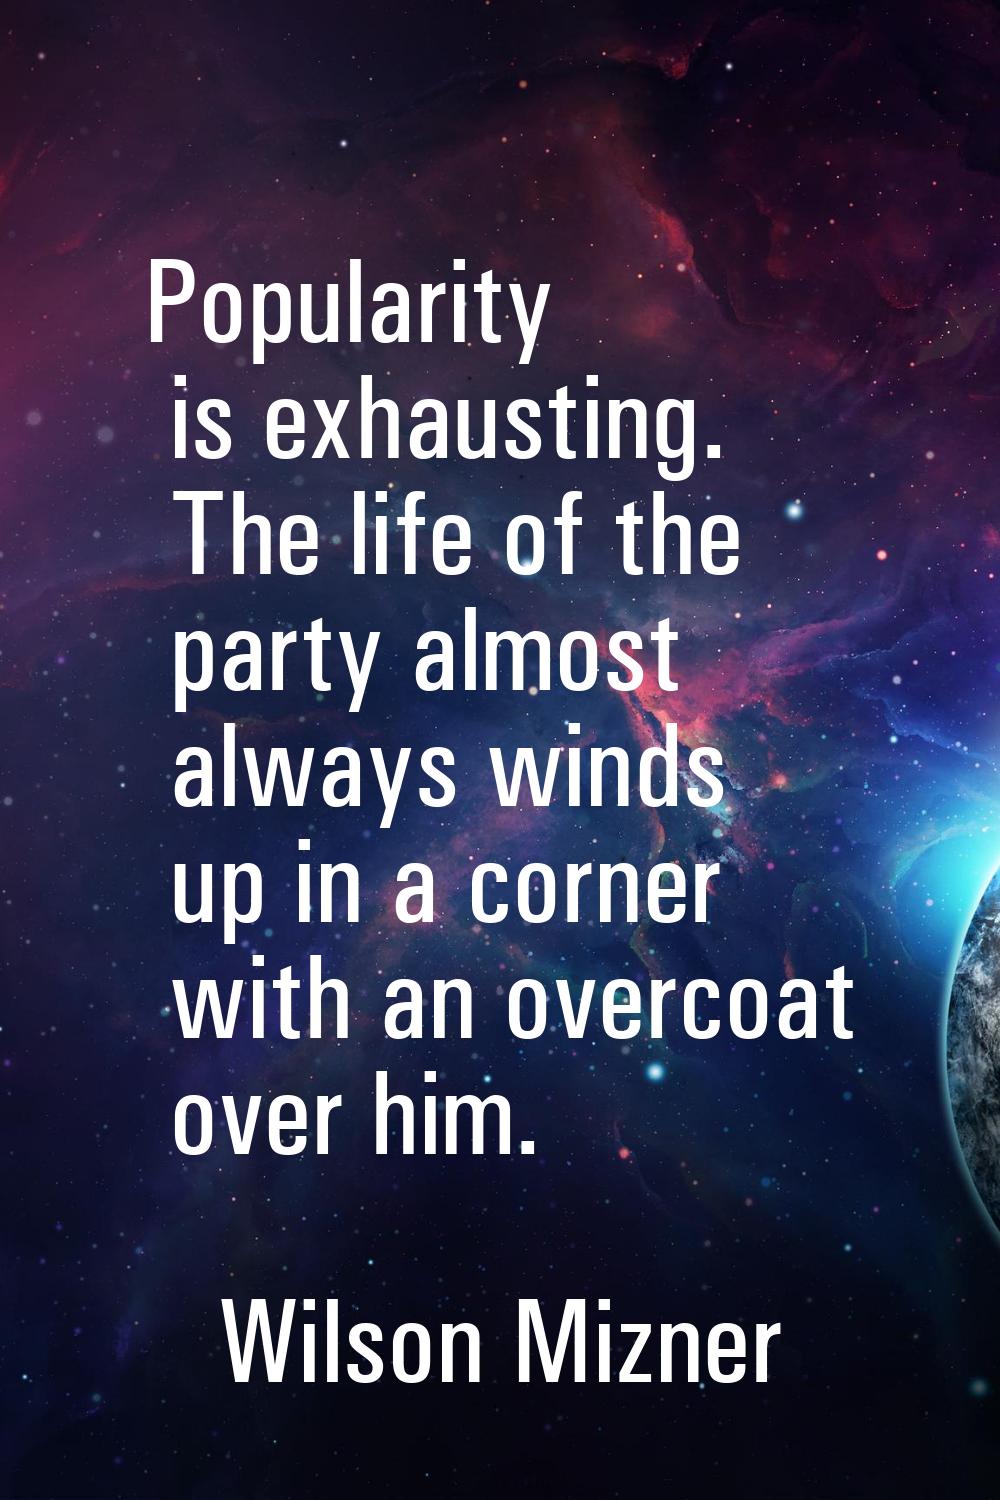 Popularity is exhausting. The life of the party almost always winds up in a corner with an overcoat